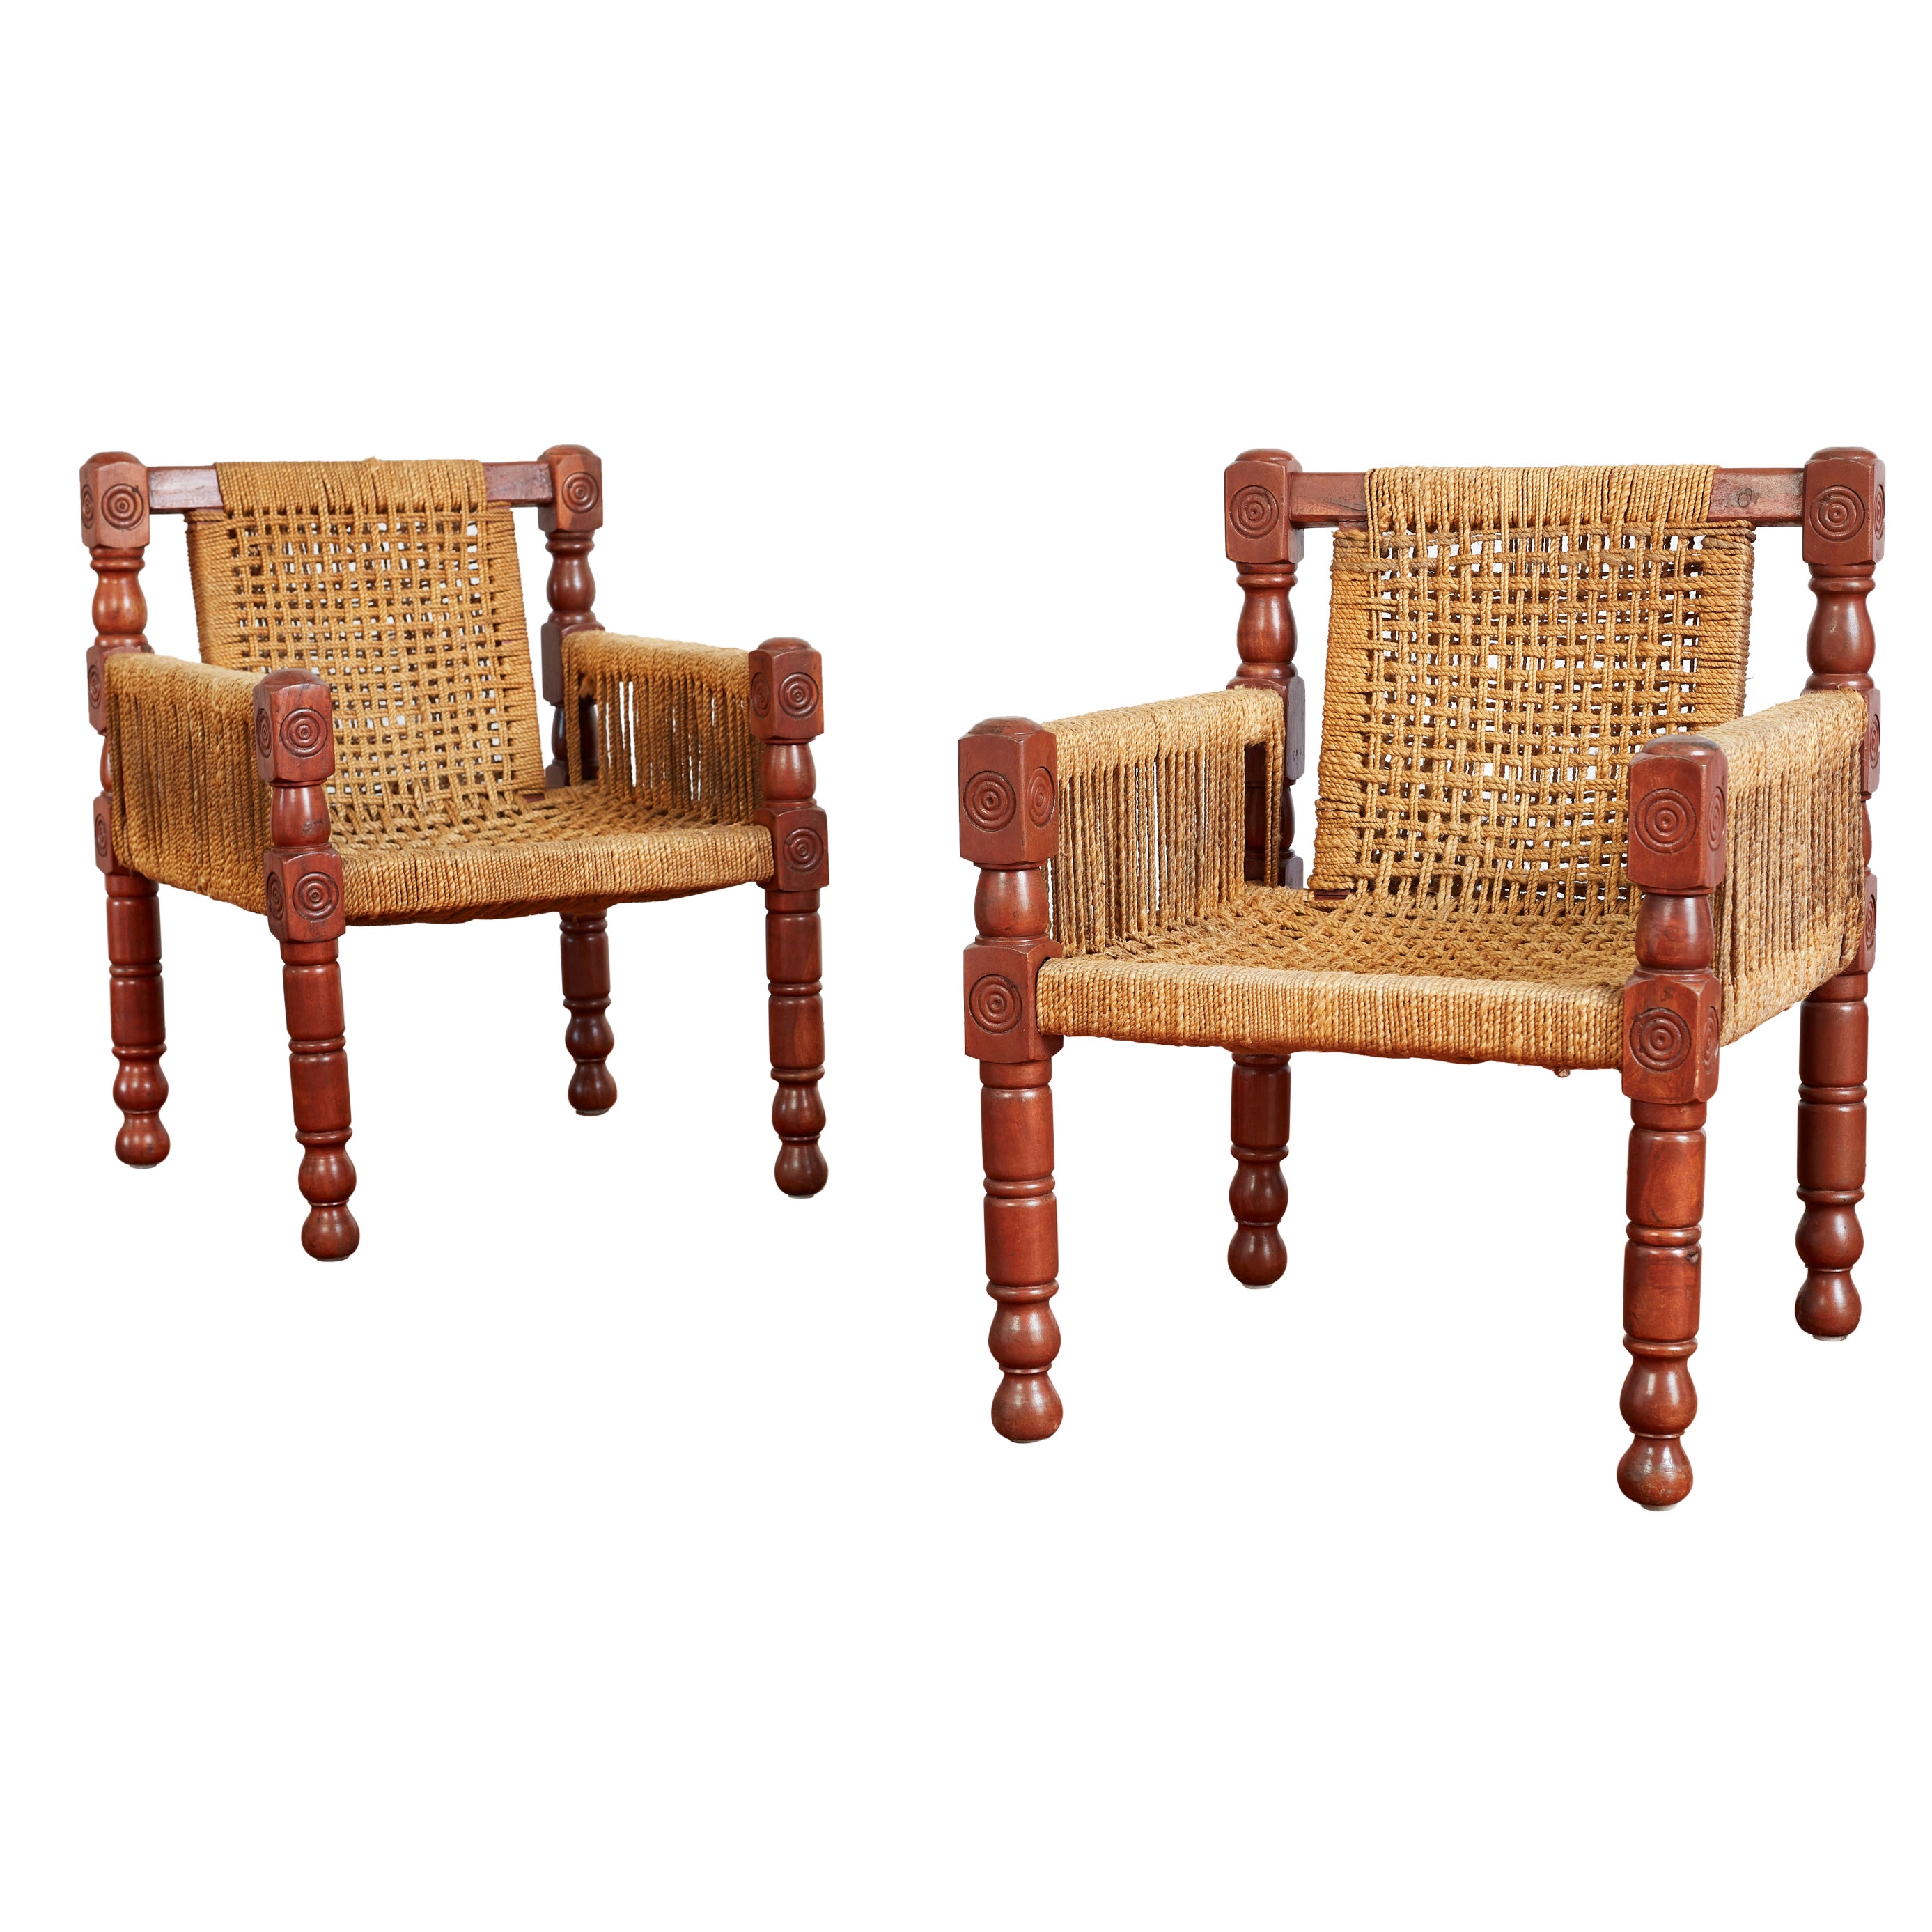 Audoux Minet Style Chairs For Sale